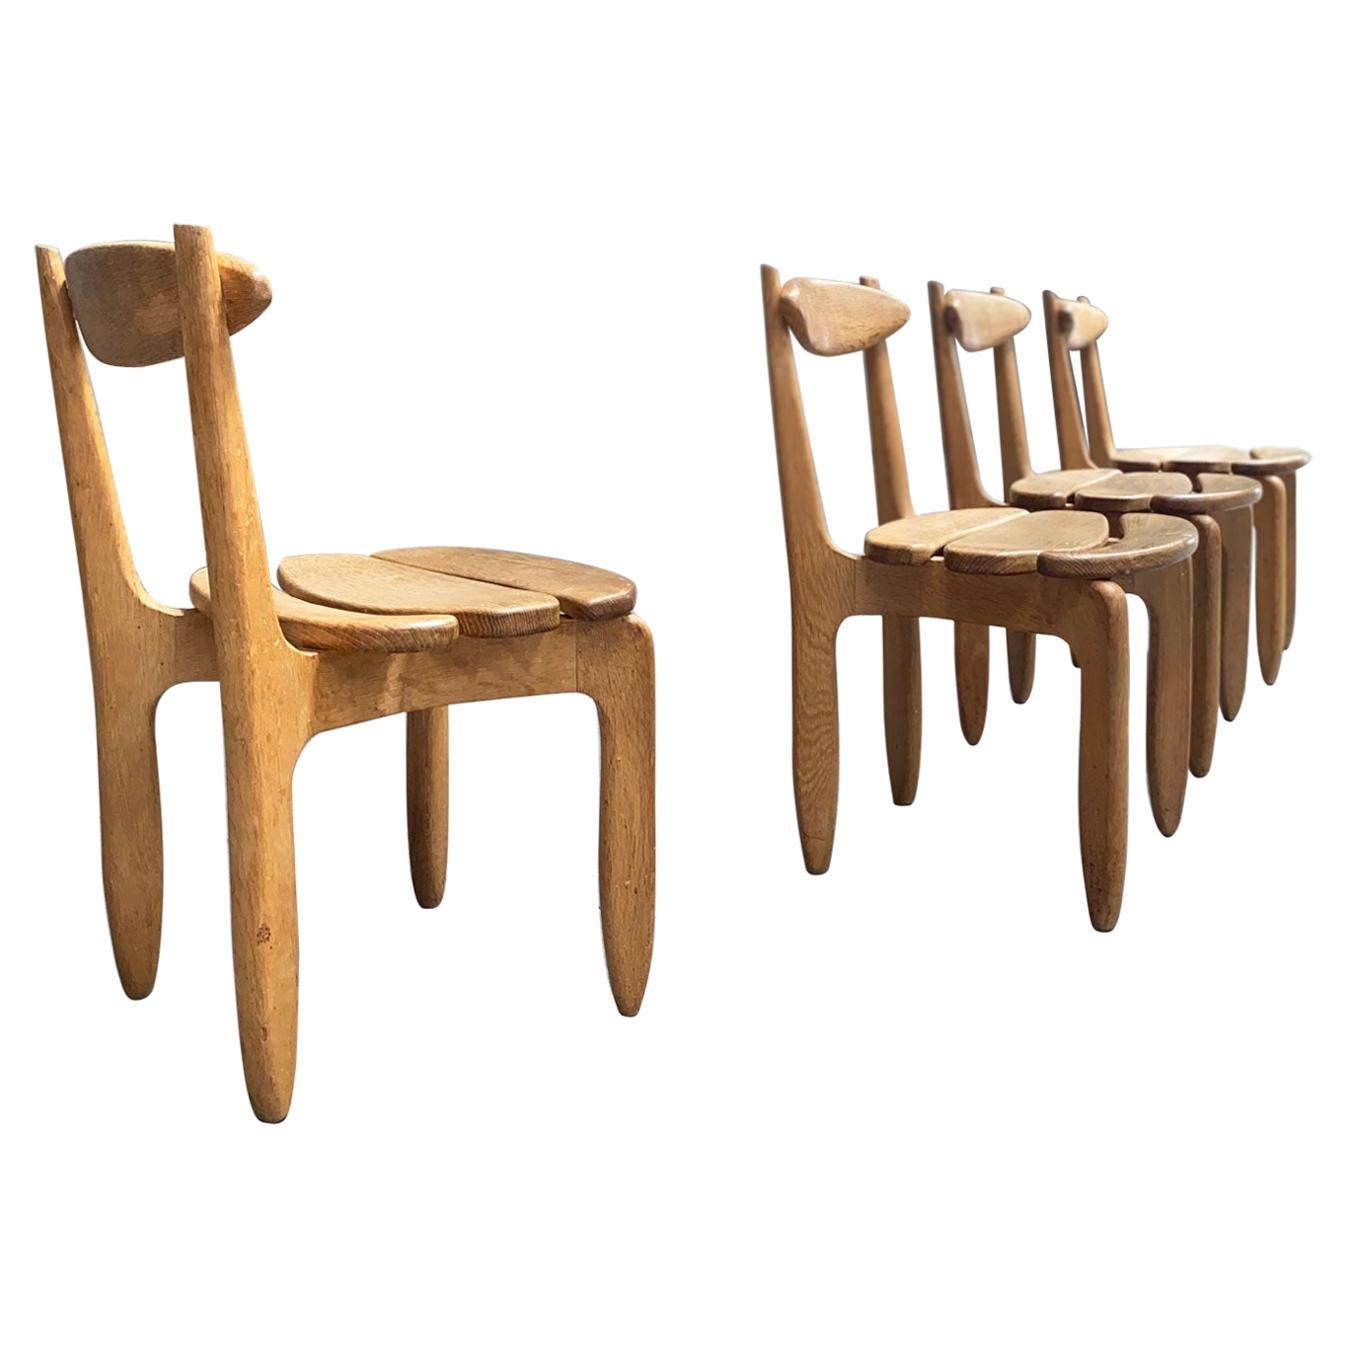 Guillerme & Chambron a Set of 4 "Thierry Chairs" for Votre Maison